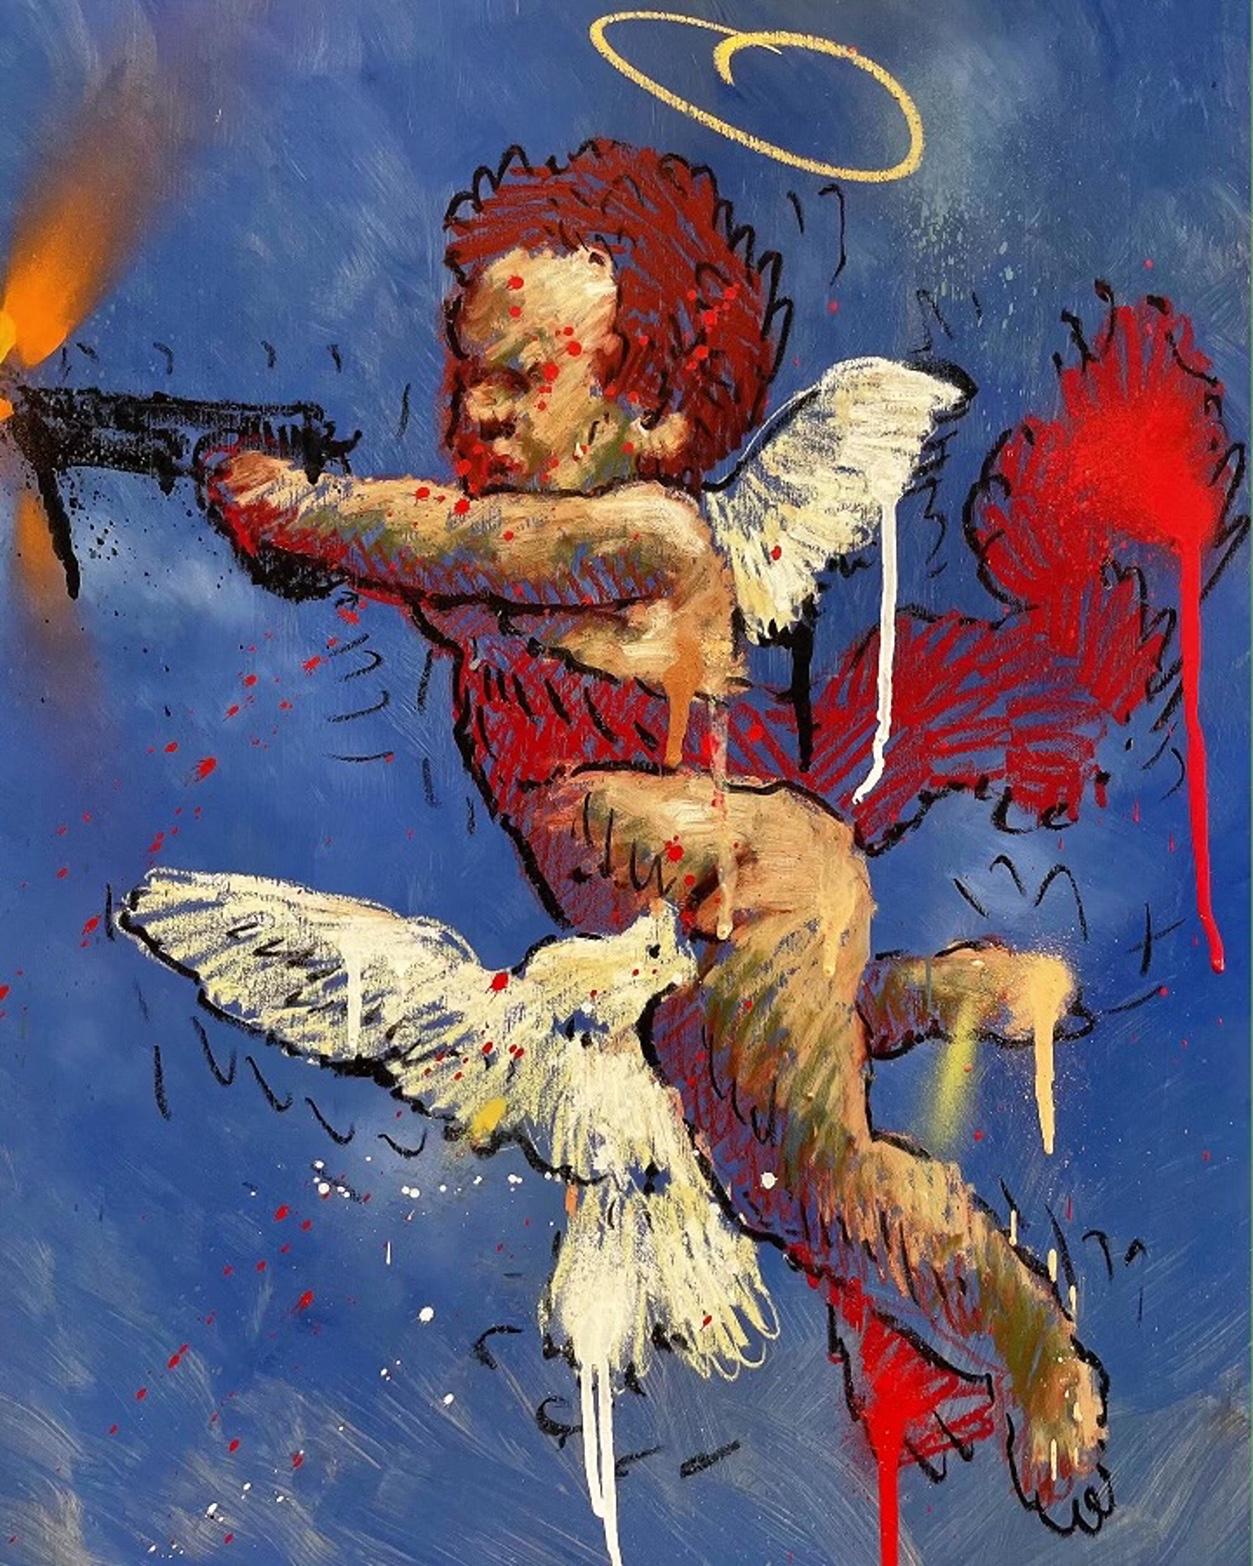 "ANTI GUN VIOLENCE" (FRAMED) Painting 24" x 18" inch by Isaac Pelayo

Medium: Oil, oil stick, acrylic, aerosol on wood

Size: 24" x 18" inch
Size framed: 30" x 24" inch

ABOUT THE ARTIST: 

Isaac Pelayo is a head on crash collision between The